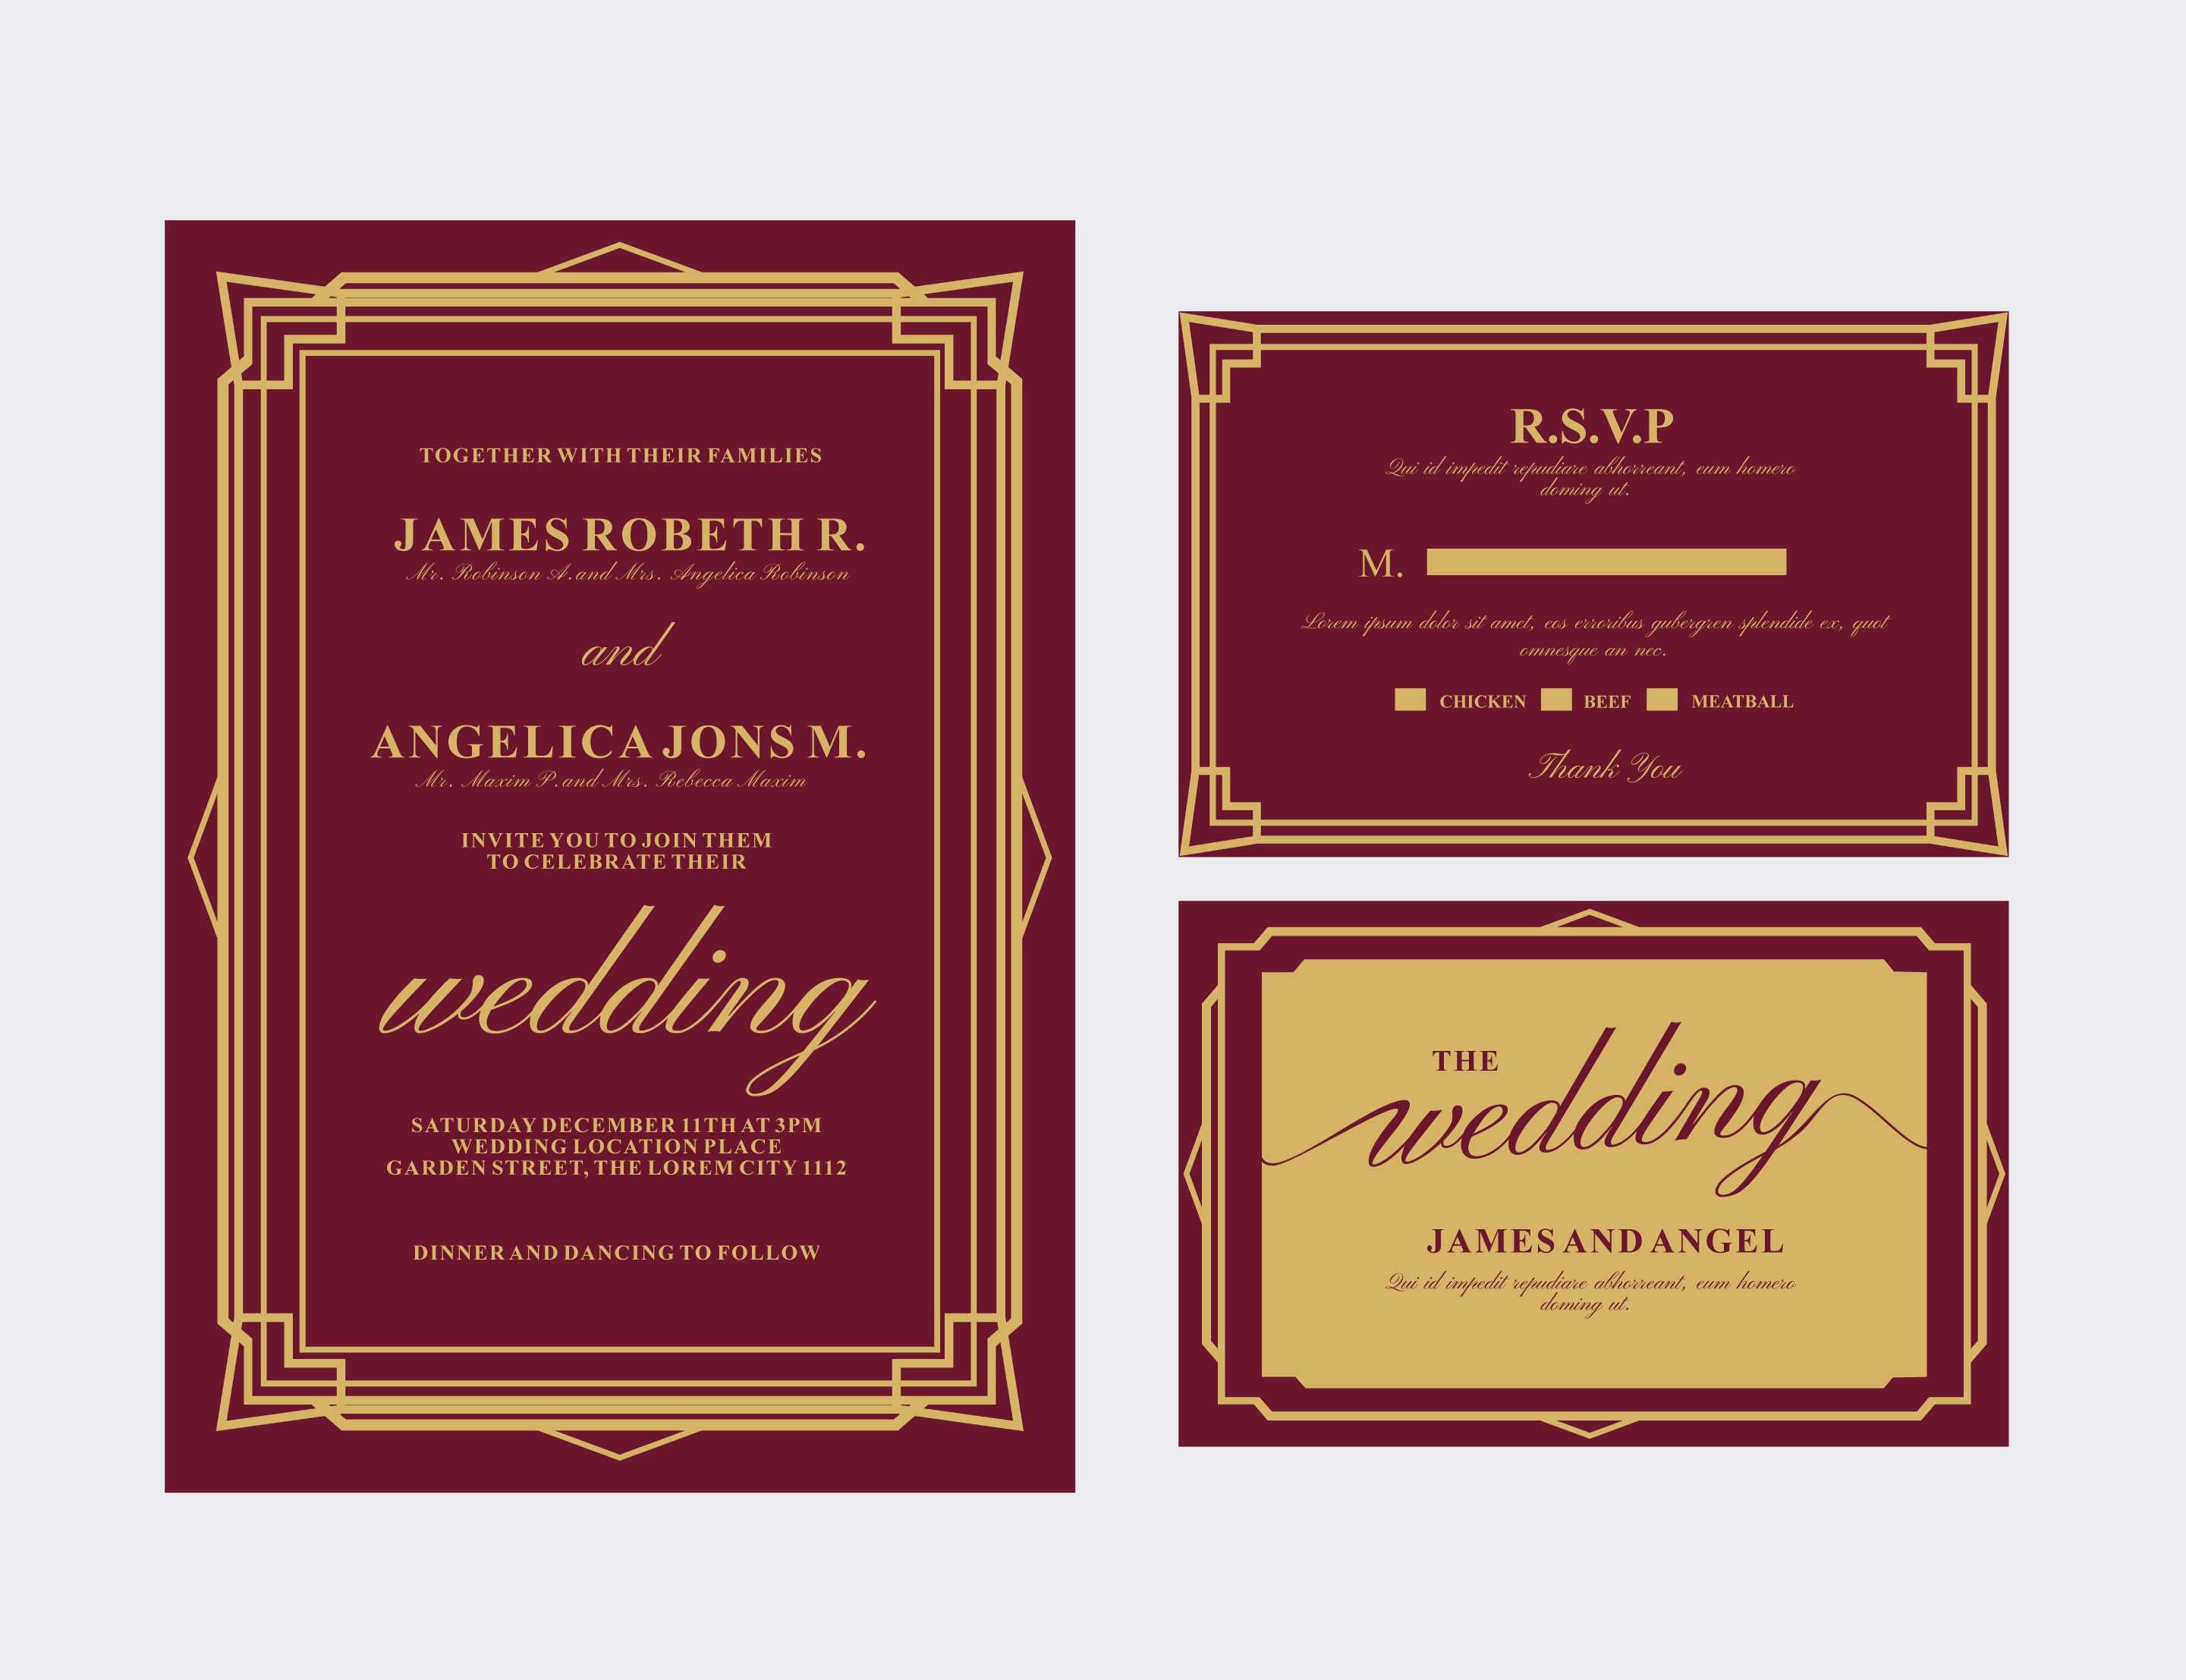 Indian Wedding Card Free Vector Art – (418 Free Downloads) Intended For Indian Wedding Cards Design Templates